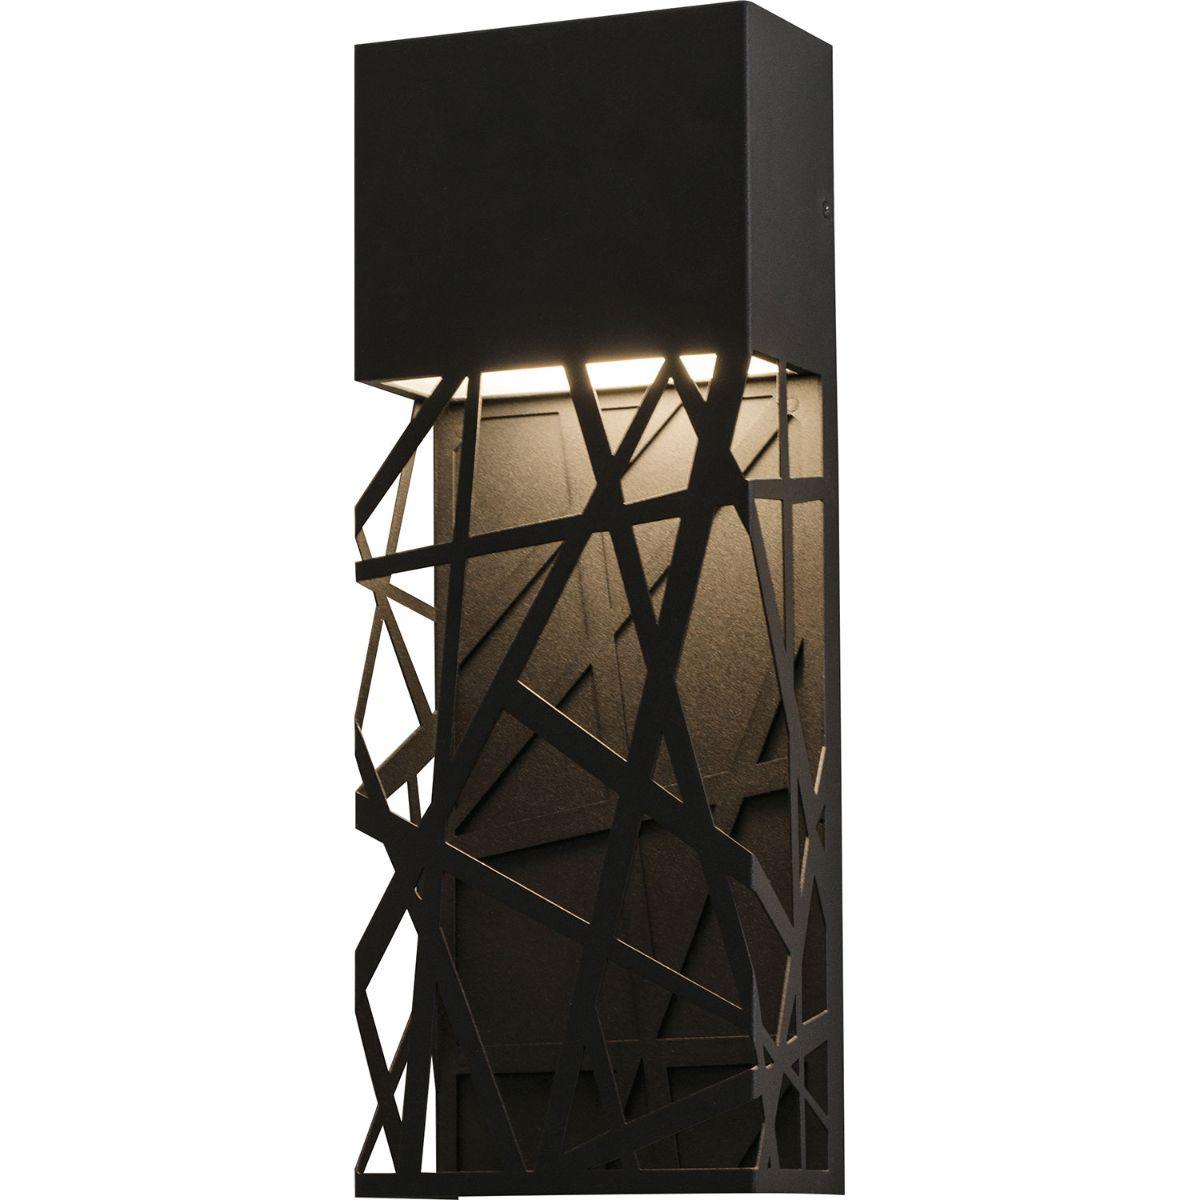 Boon 16 in. LED Outdoor Wall Sconce